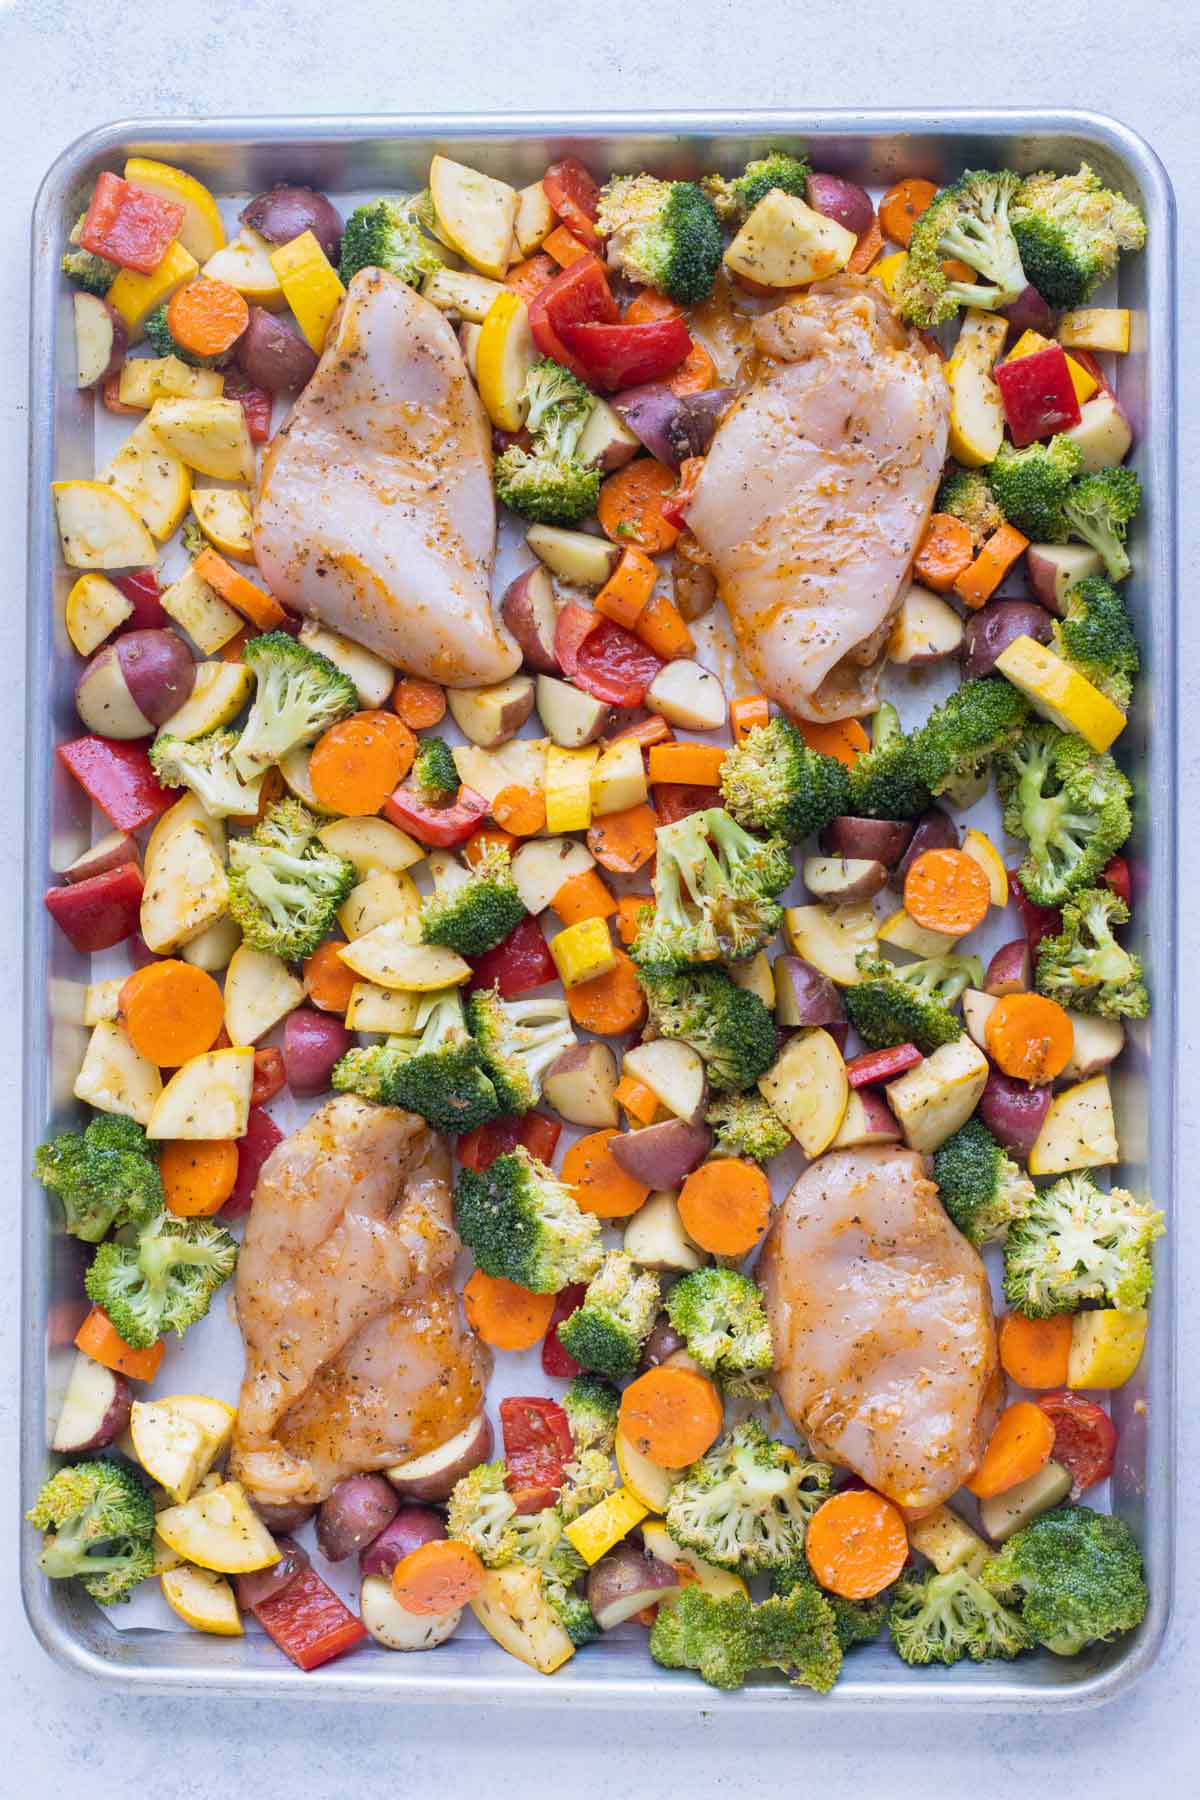 Raw chicken and veggies are seasoned and ready to bake.